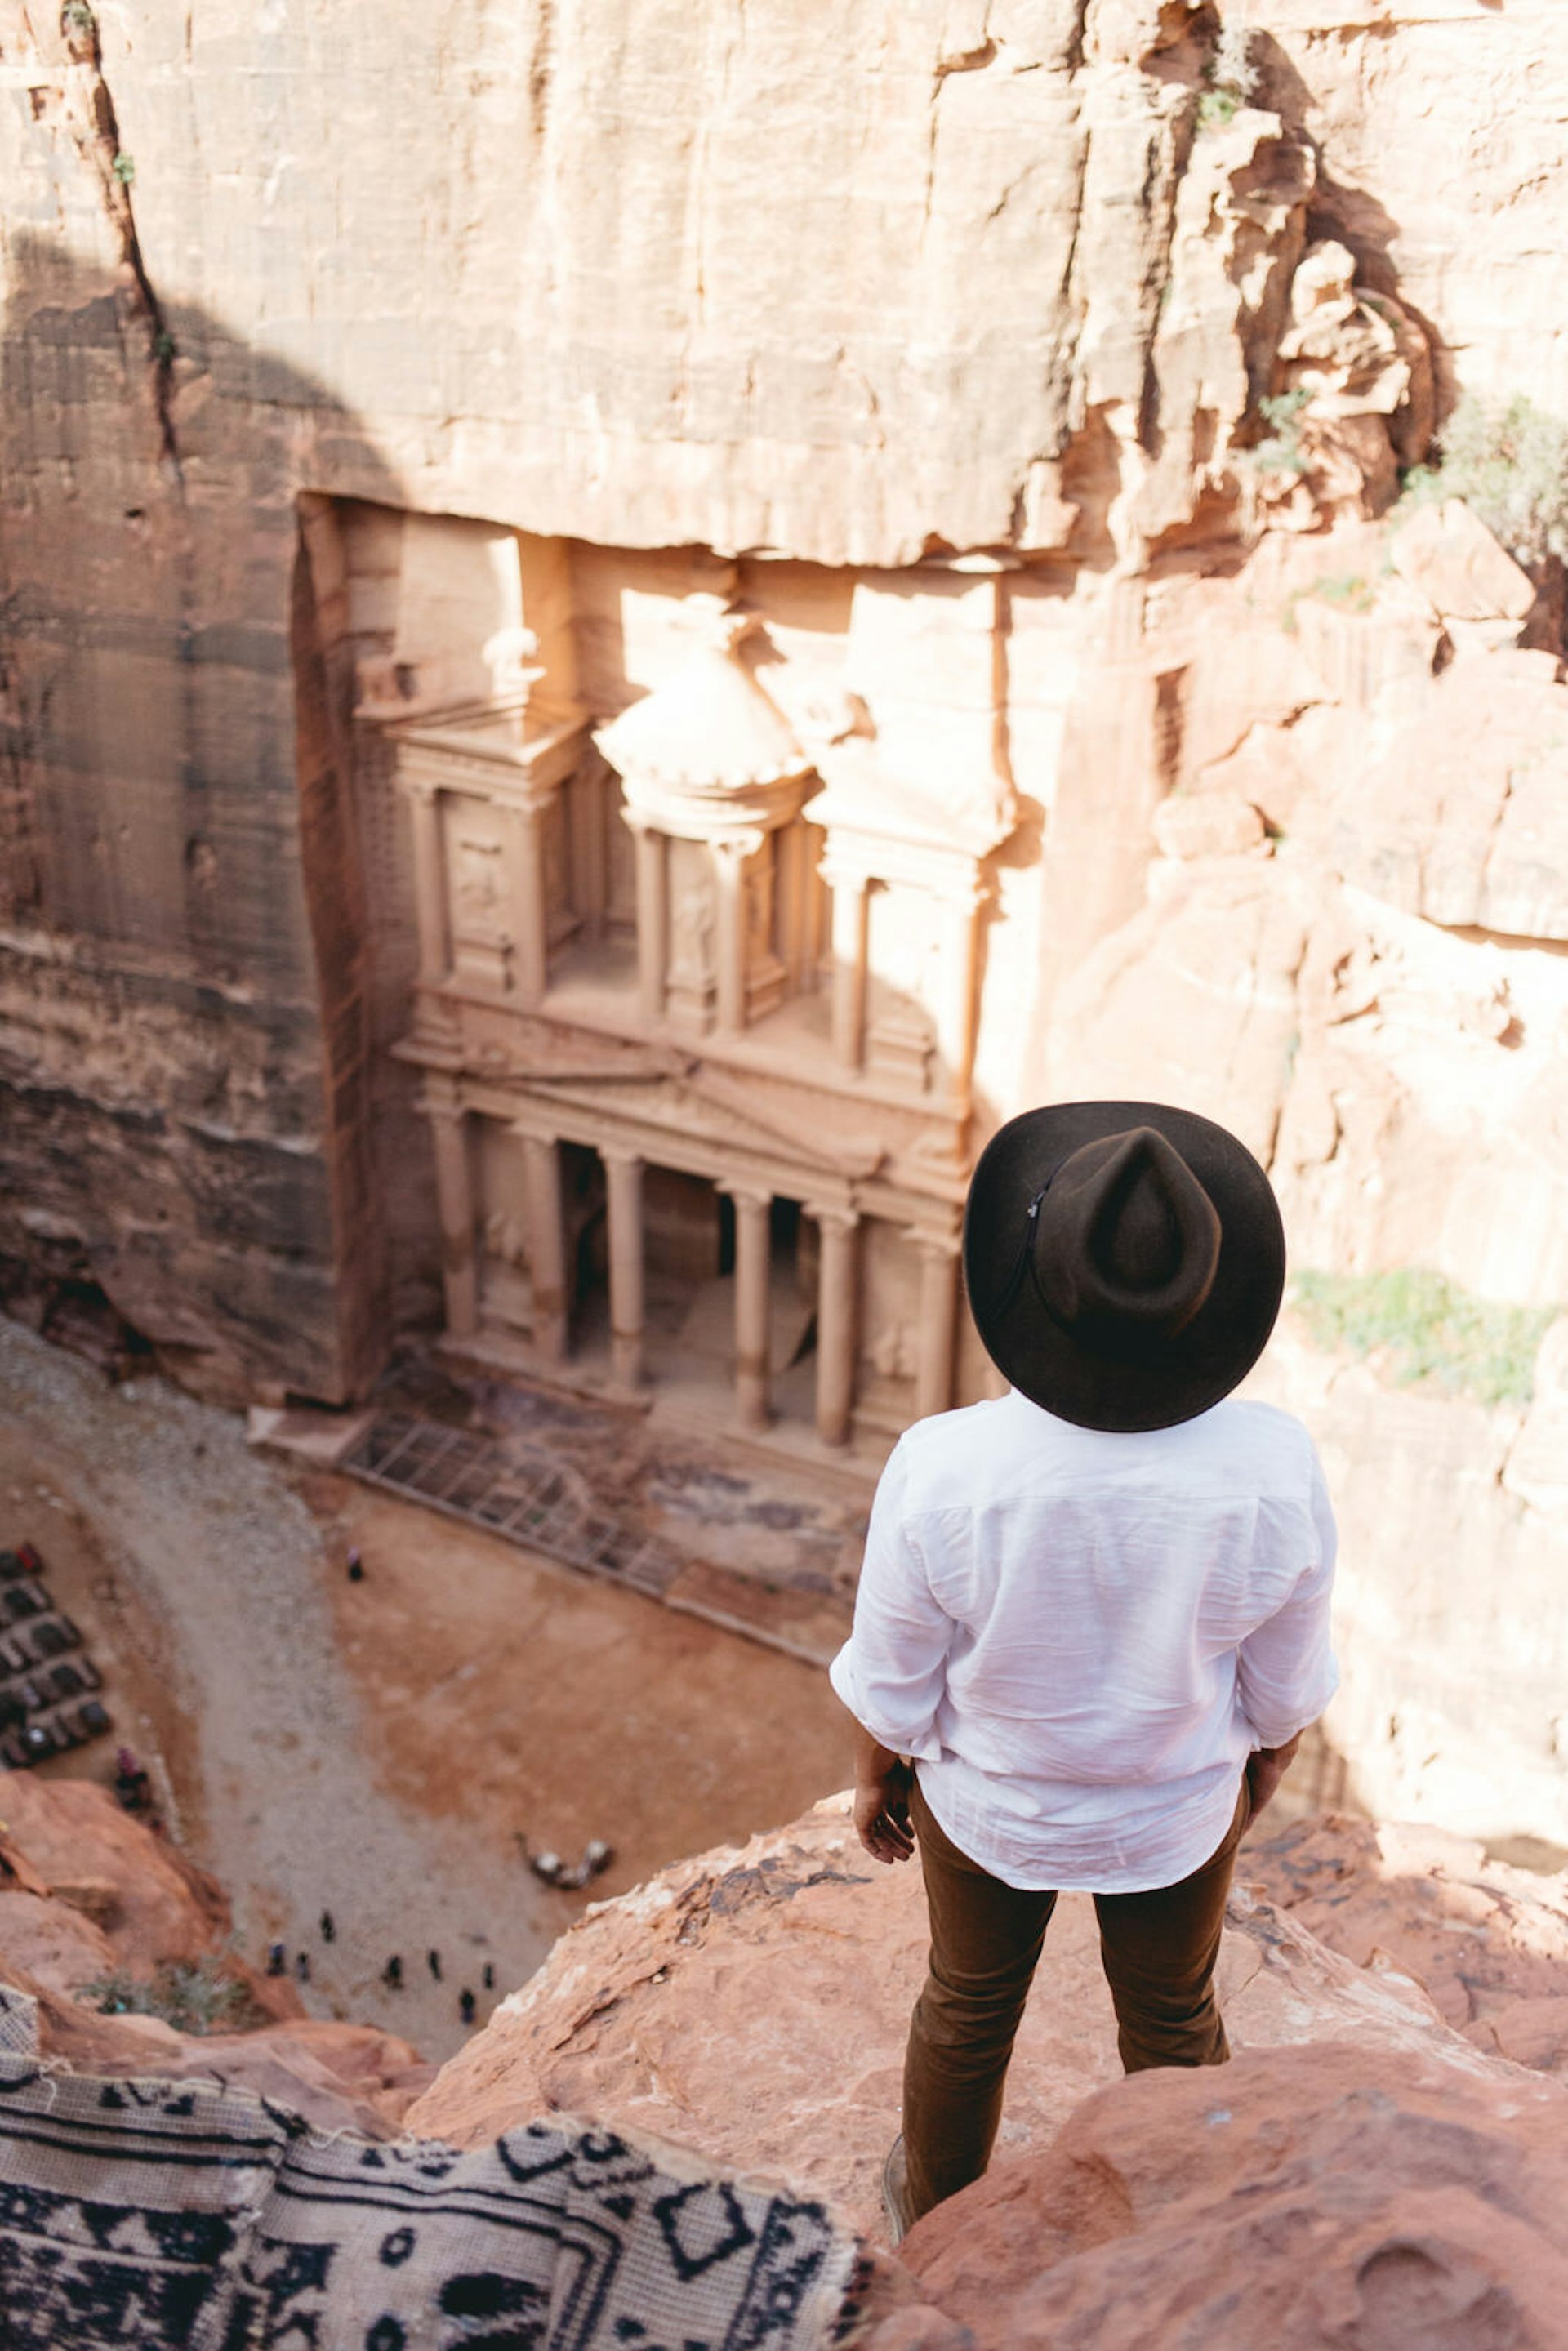 Person standing above the Treasury, Petra, Jordan. Image by Jin Chu Ferrer / Getty Images